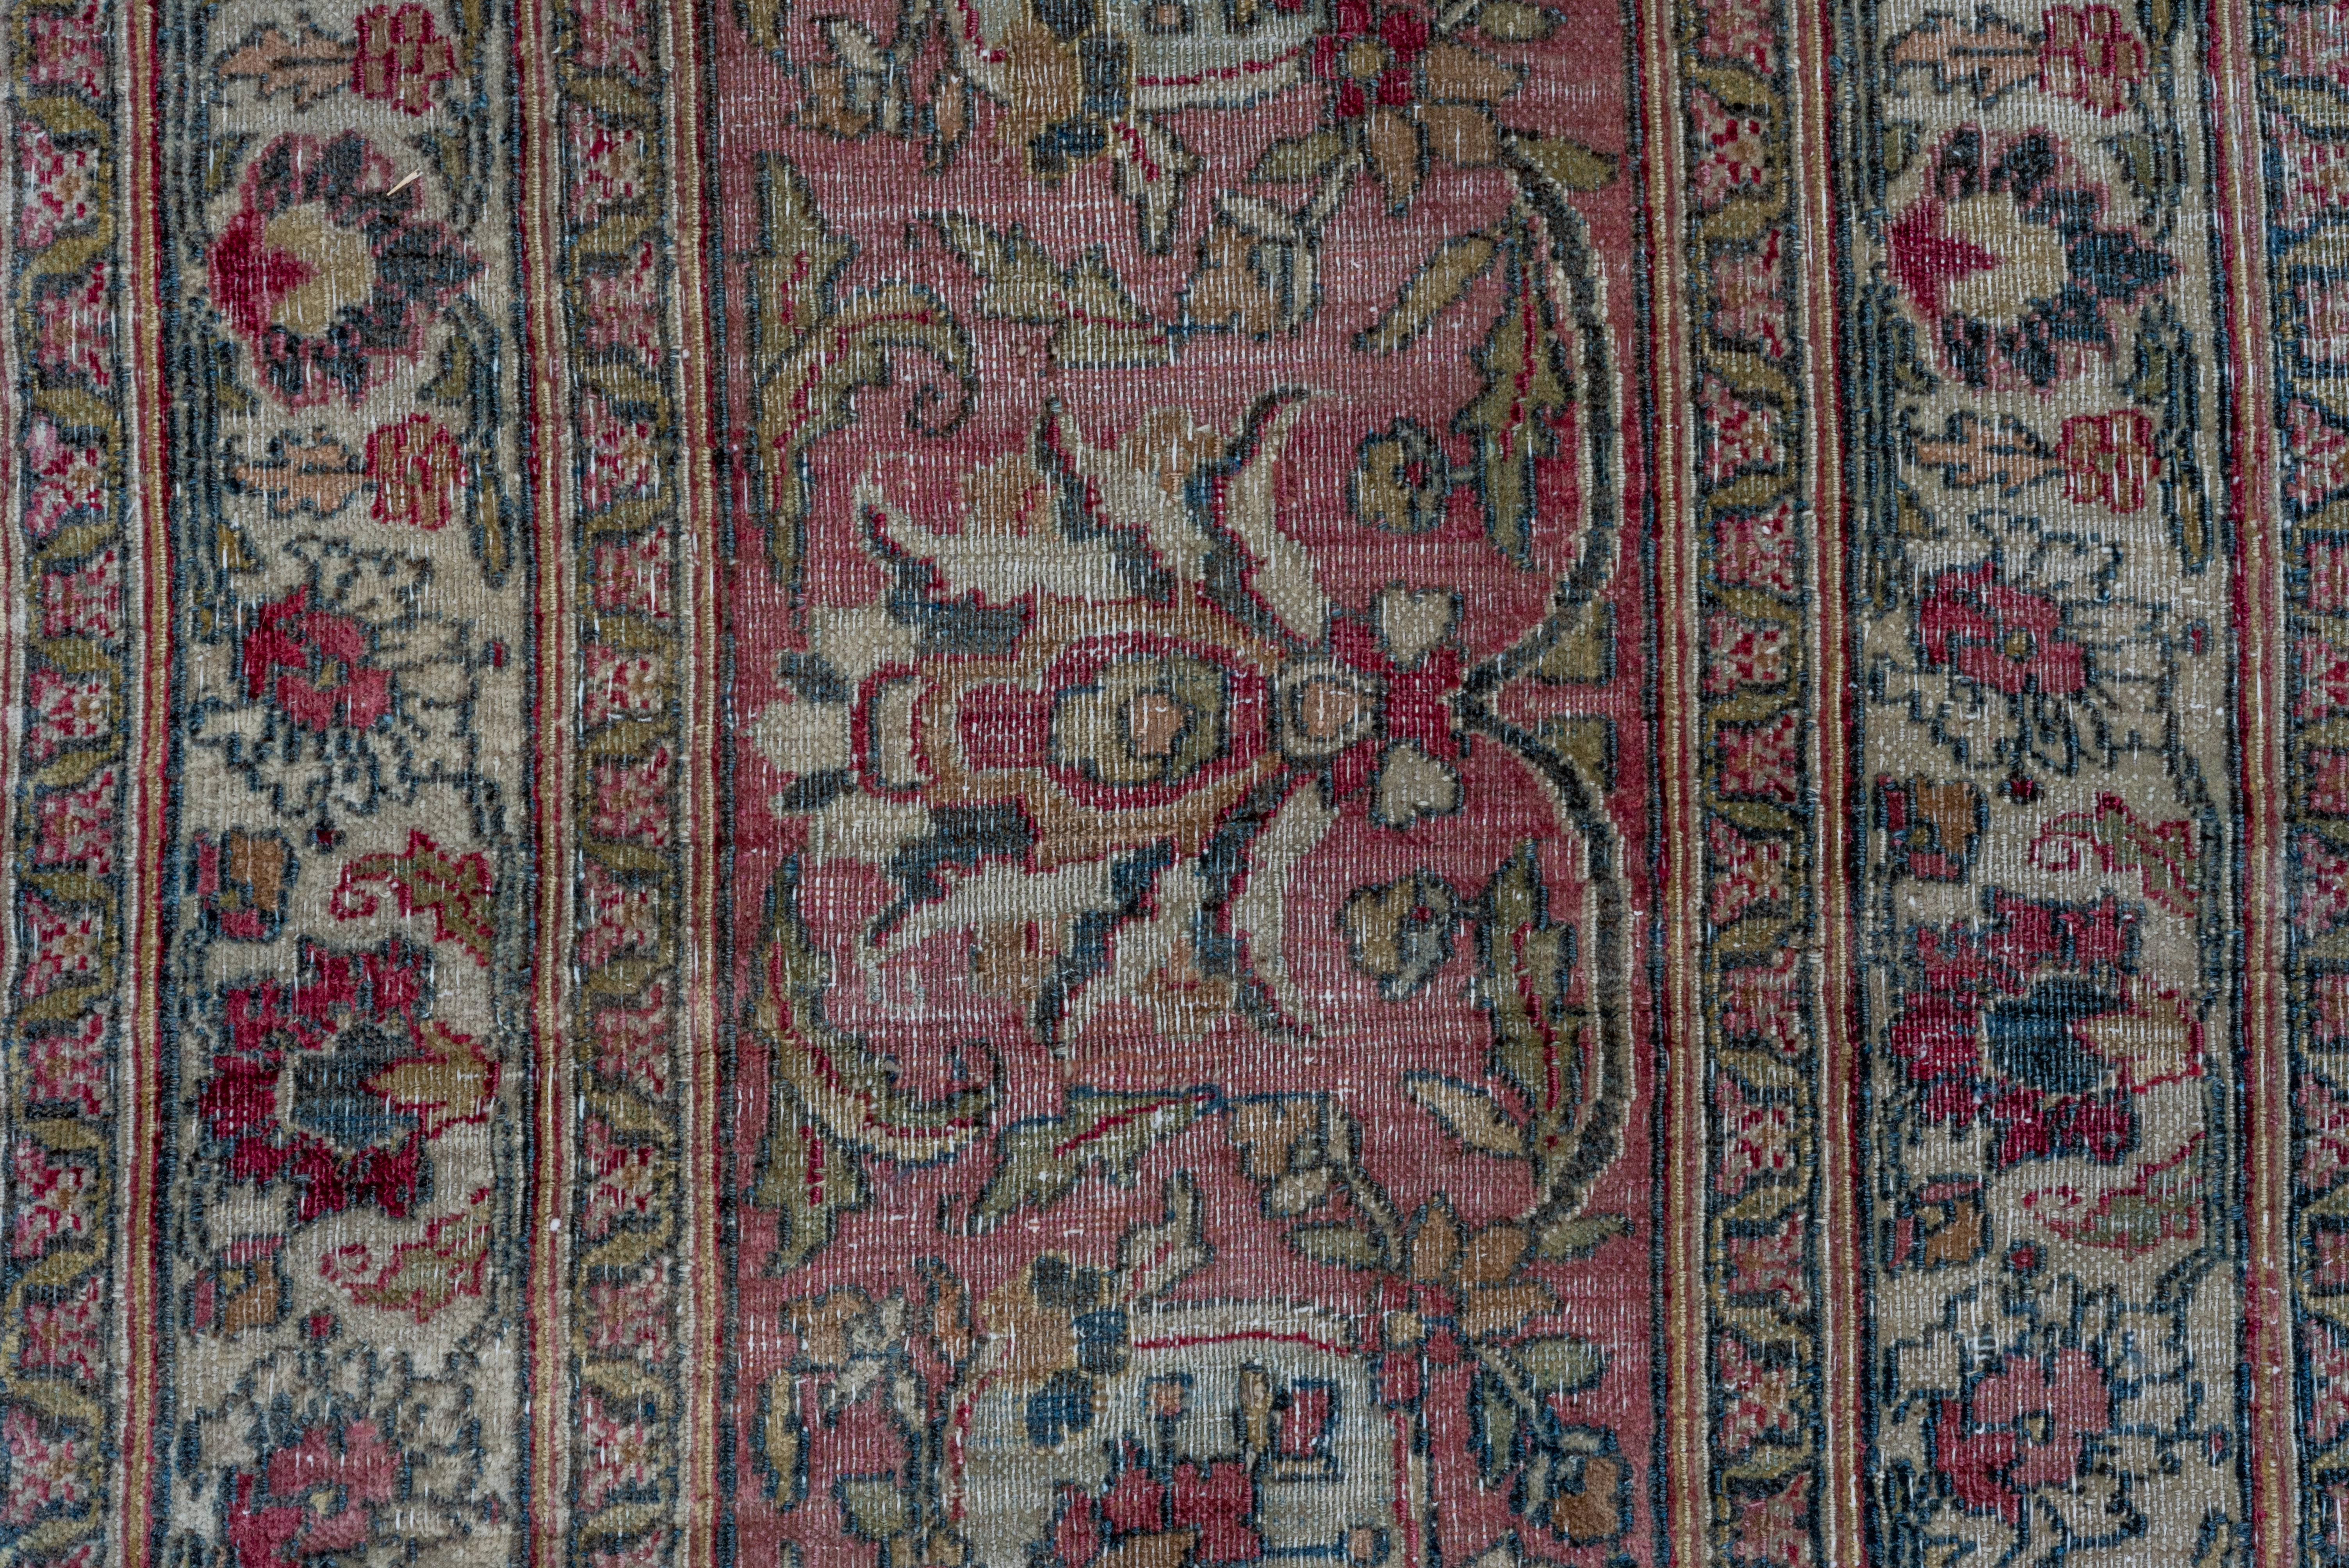 Wool Antique Colorful Persian Khorassan Rug, Red Pink Green and Ivory Tones For Sale